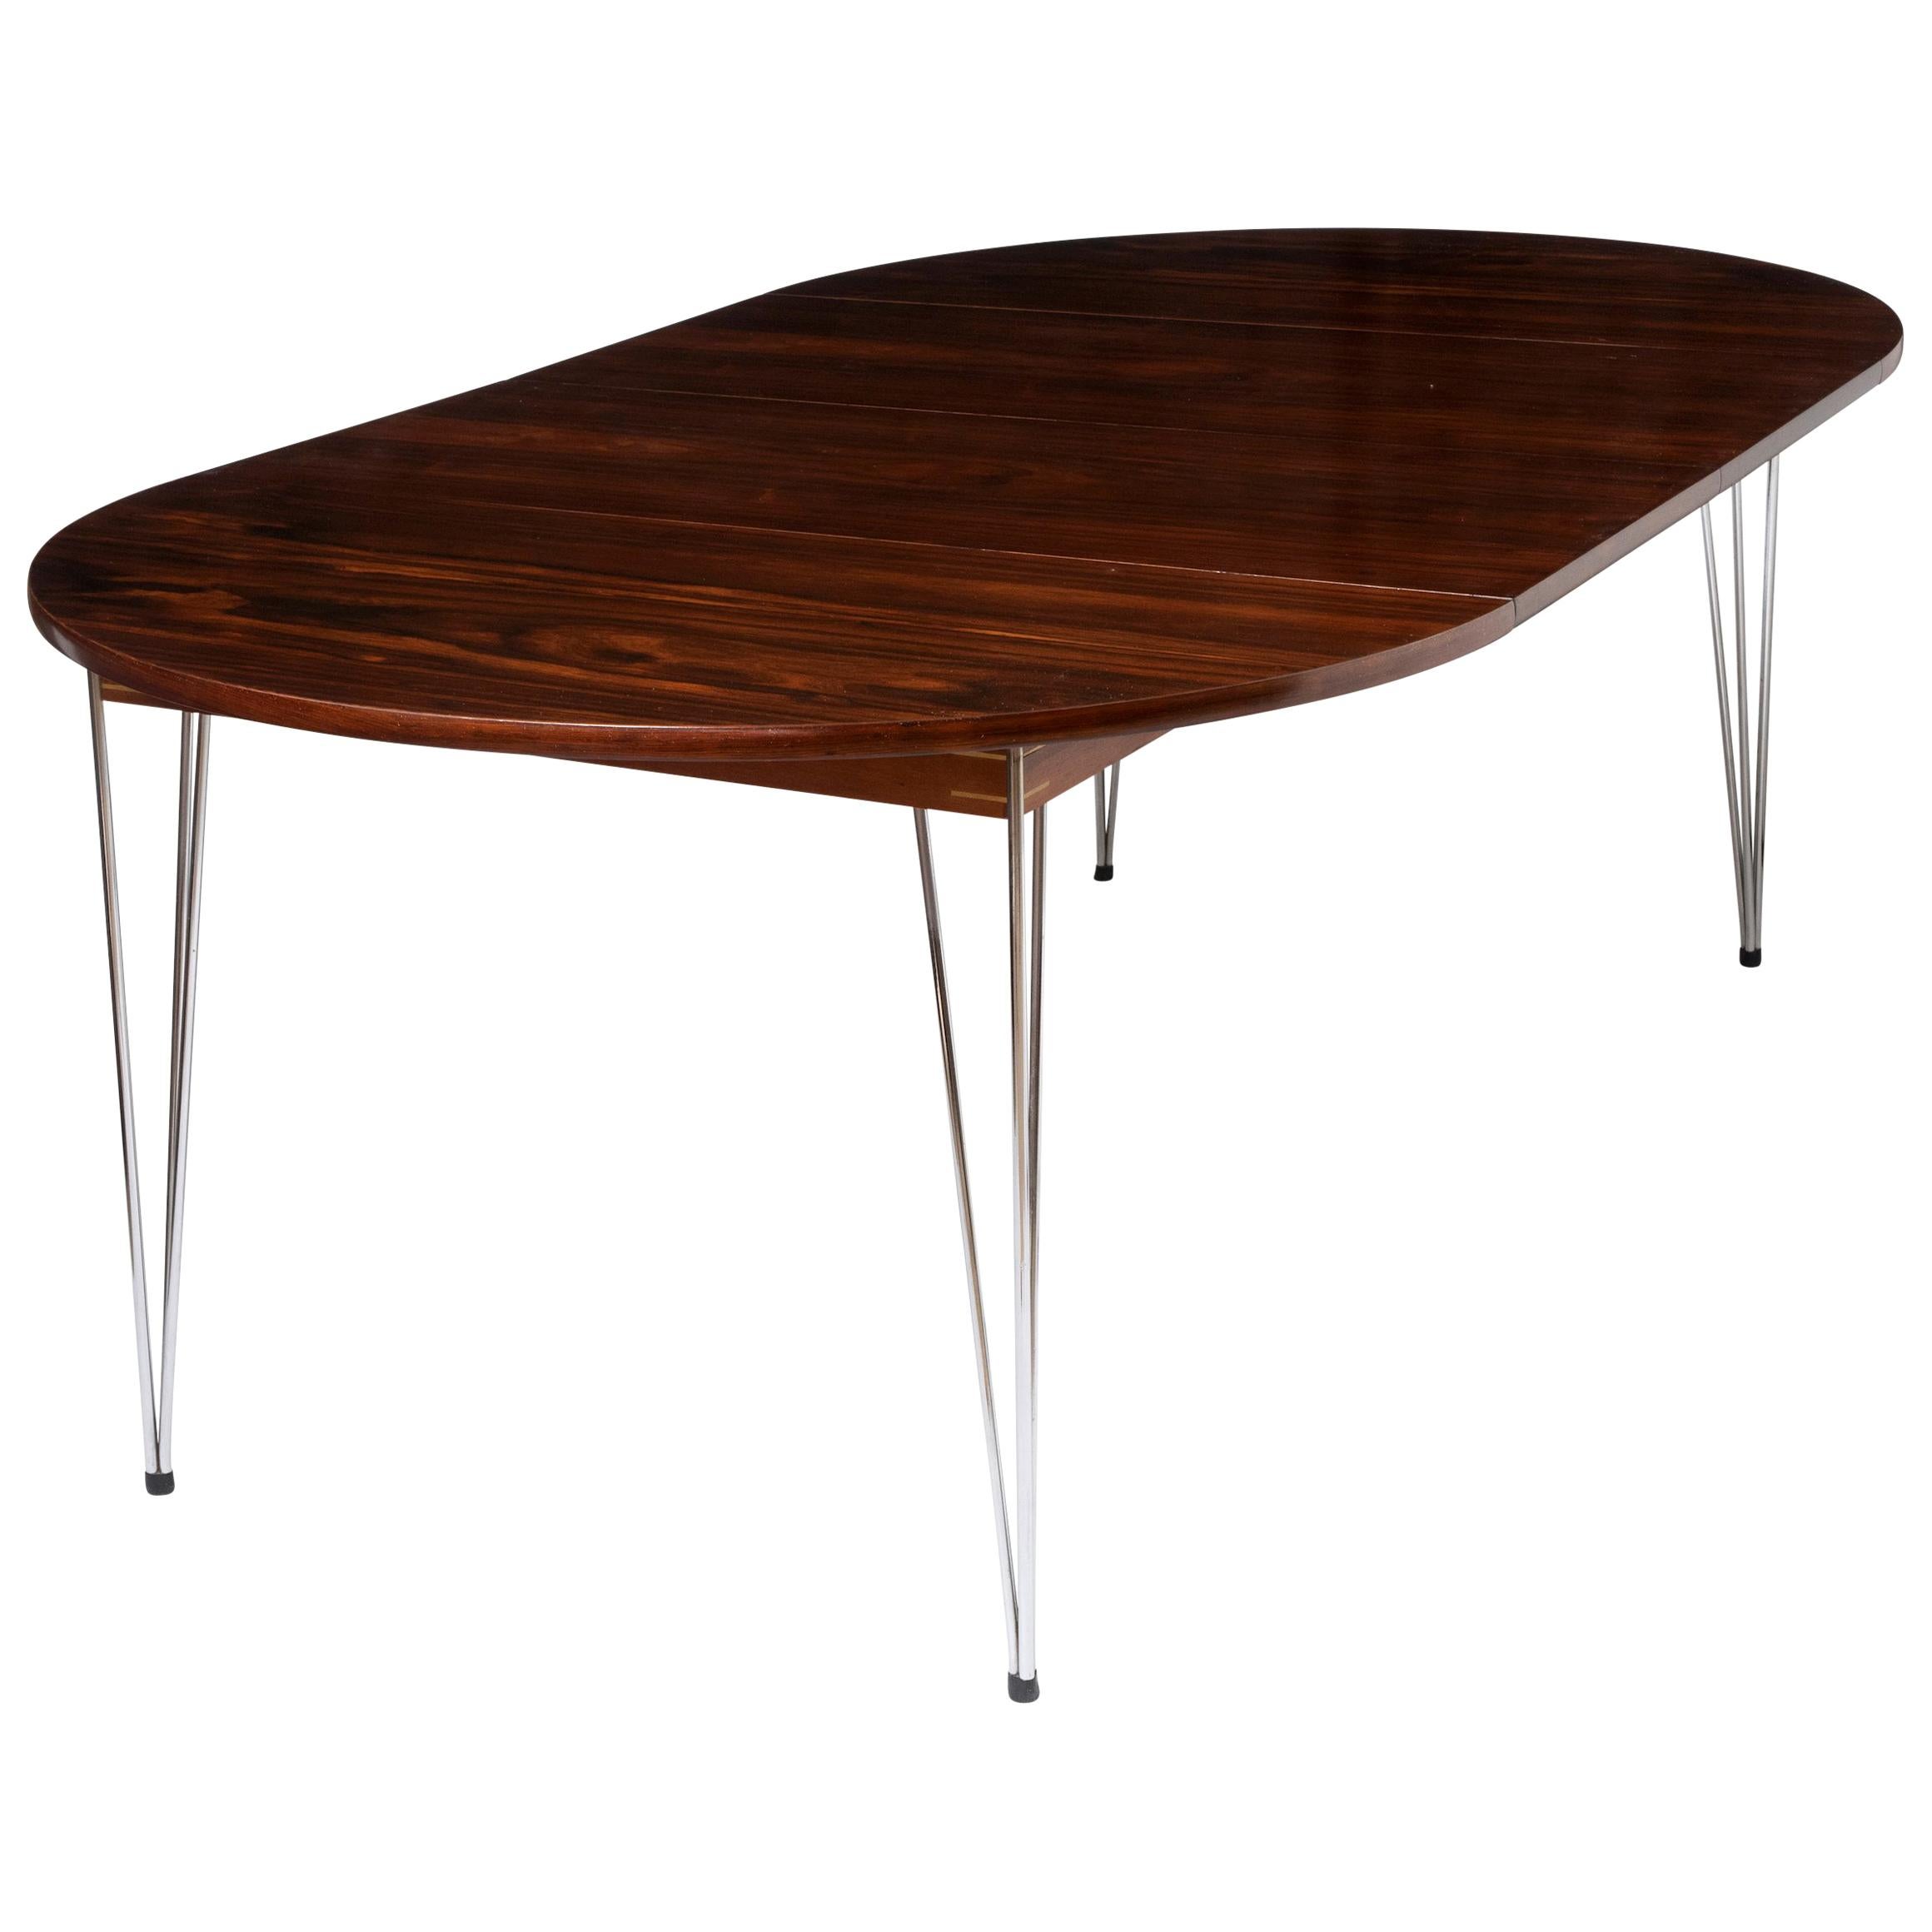 Scandinavian Rosewood Dining Table by Hans Brattrud, Norway circa 1957 For Sale